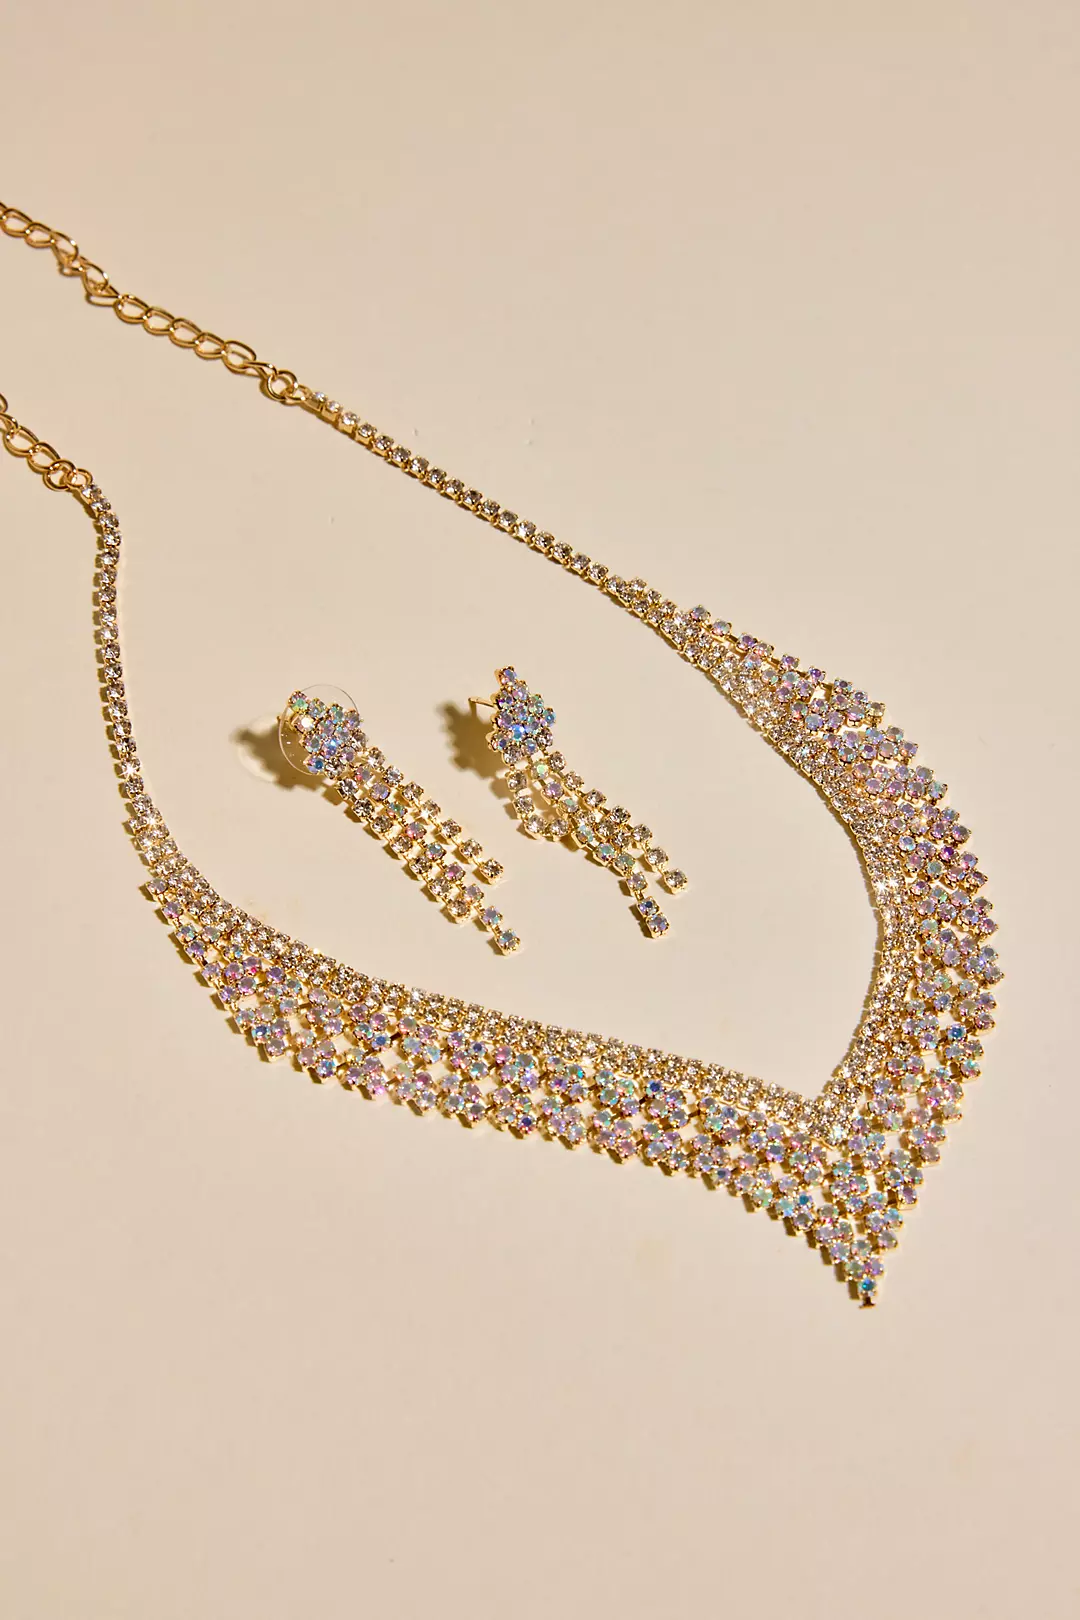 Iridescent Rhinestone Collar Necklace and Earrings Image